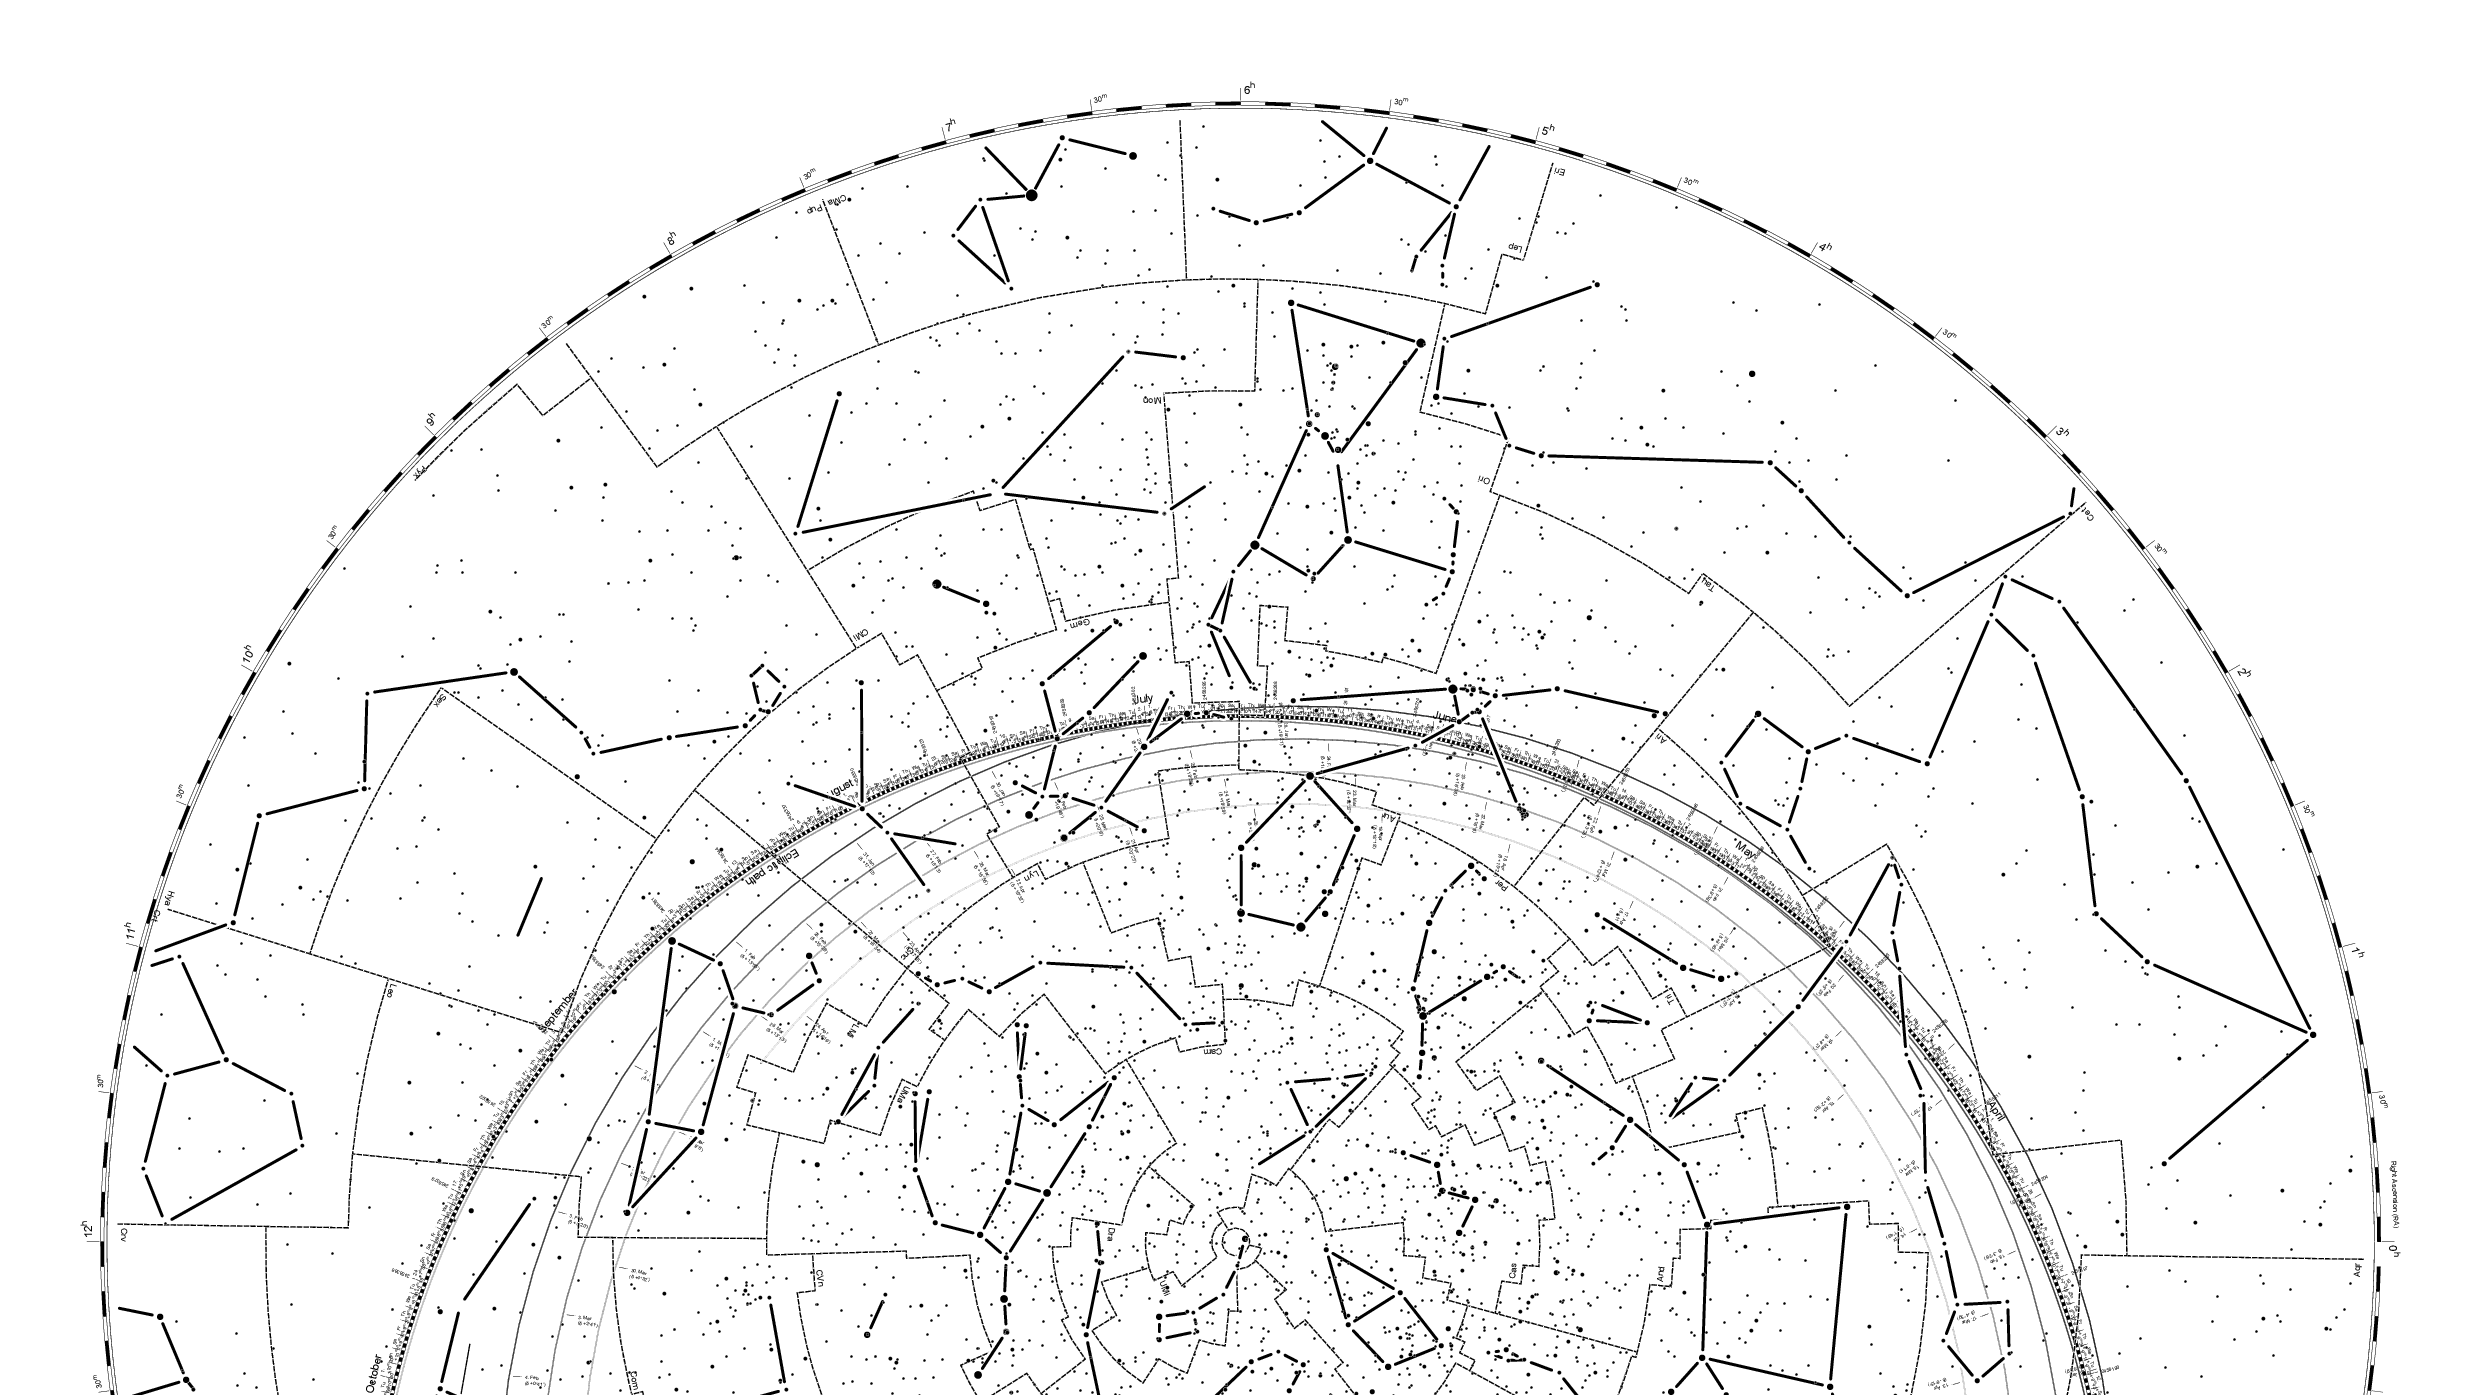 Gallery item of an artistic custom star chart showing stick figures and boundaries of ancient constellations. Grids and scales drawn in a somewhat manneristic way beyond the bounding edge of the star map.